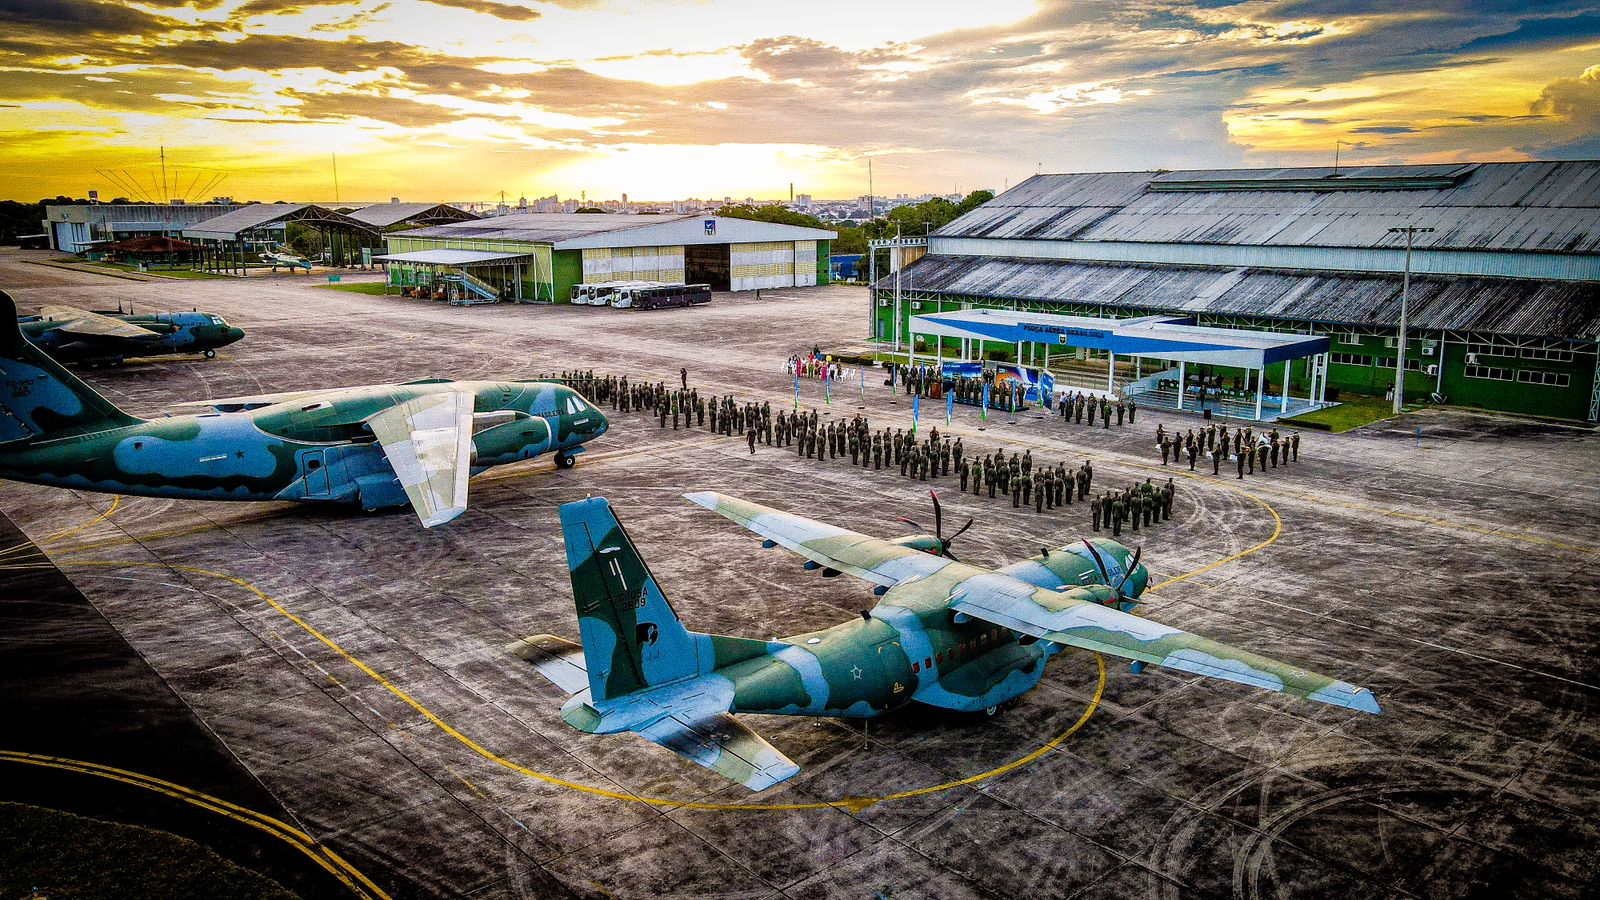 FAB Transportation Aviation meeting is held in Manaus (AM)